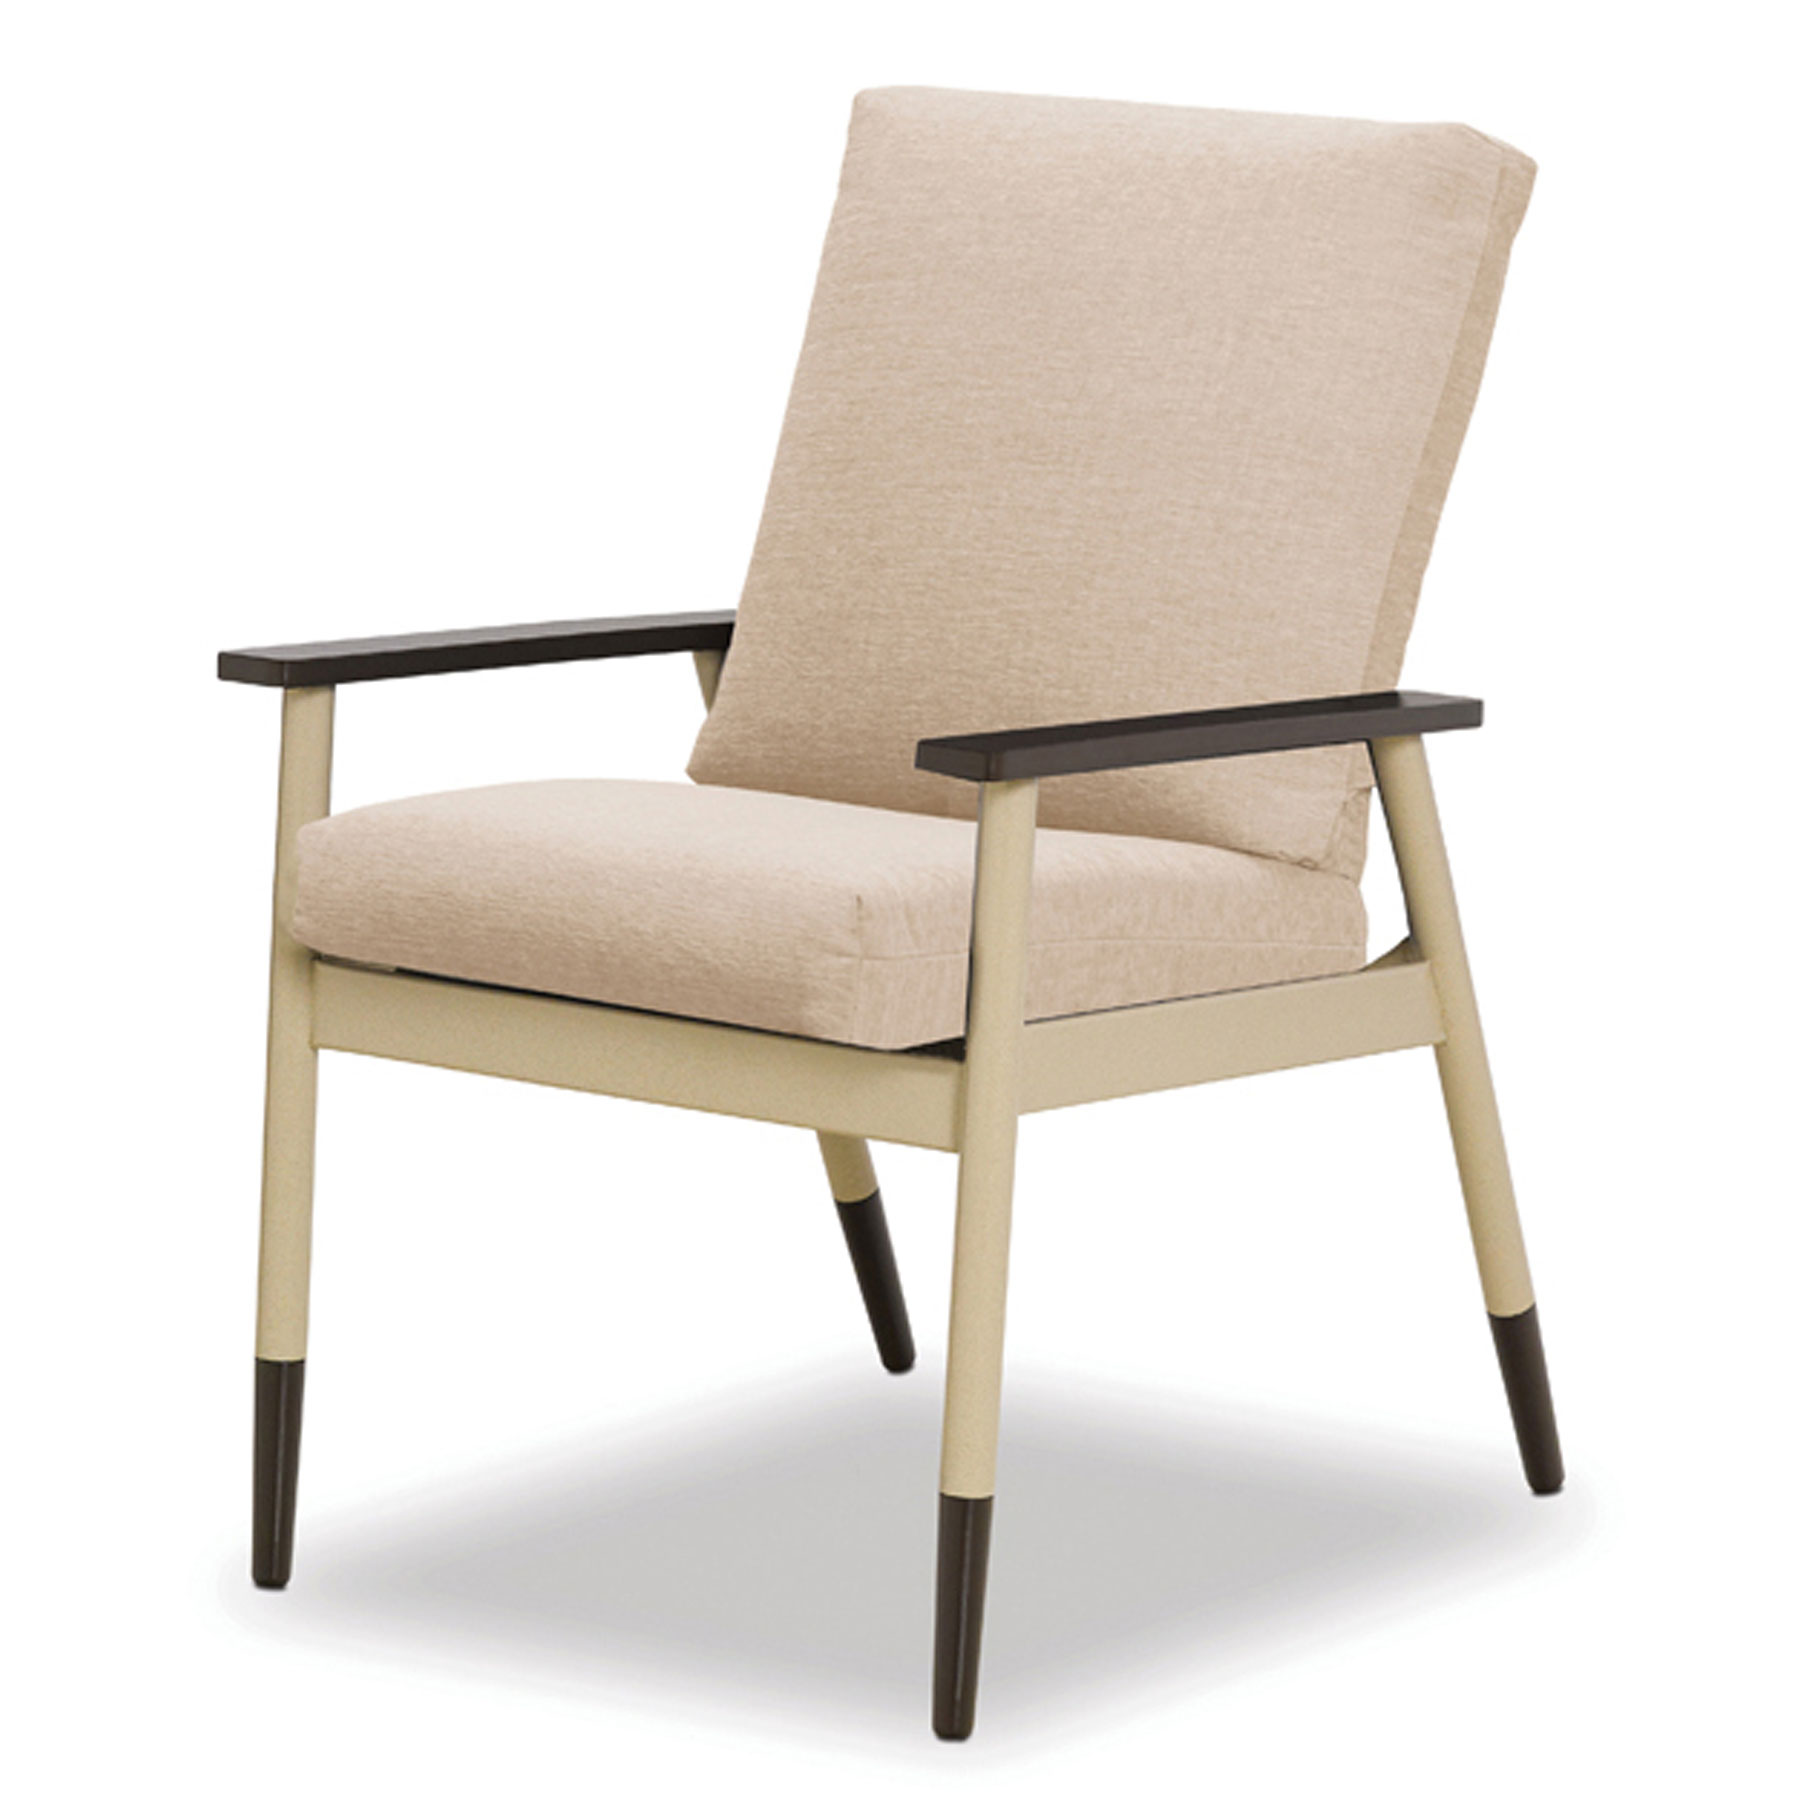 Telescope Casual Welles Cafe Dining Chair without Welting